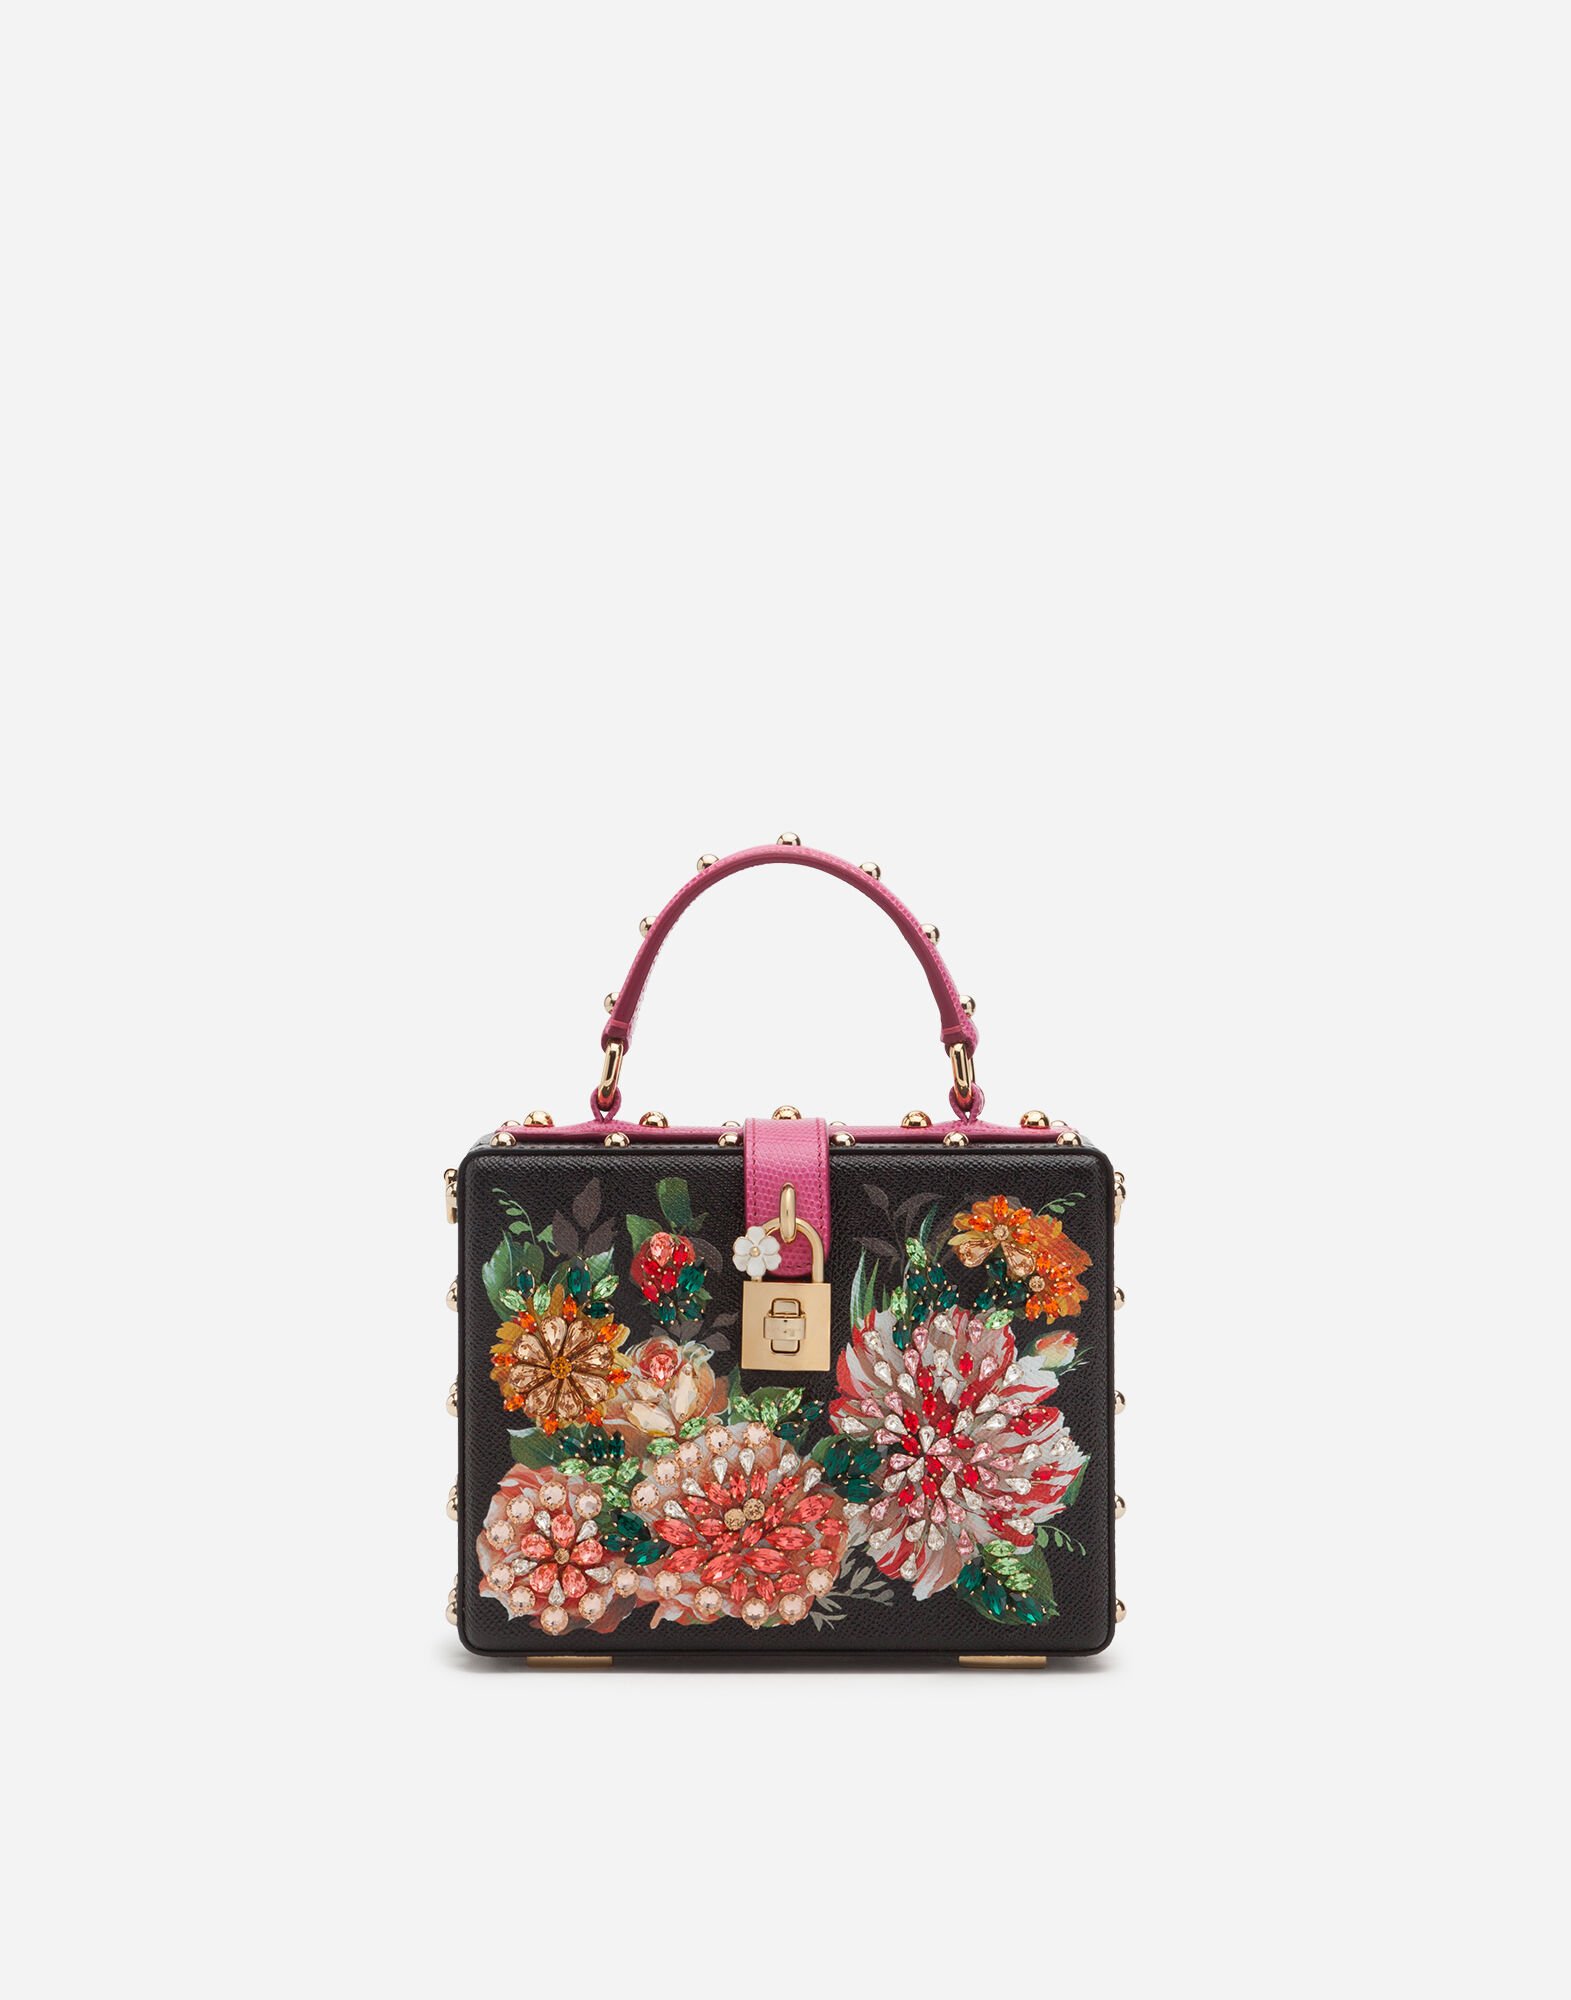 Dolce & Gabbana Dolce Box bag in printed dauphine calfskin with embroidery Print BB5970AT878